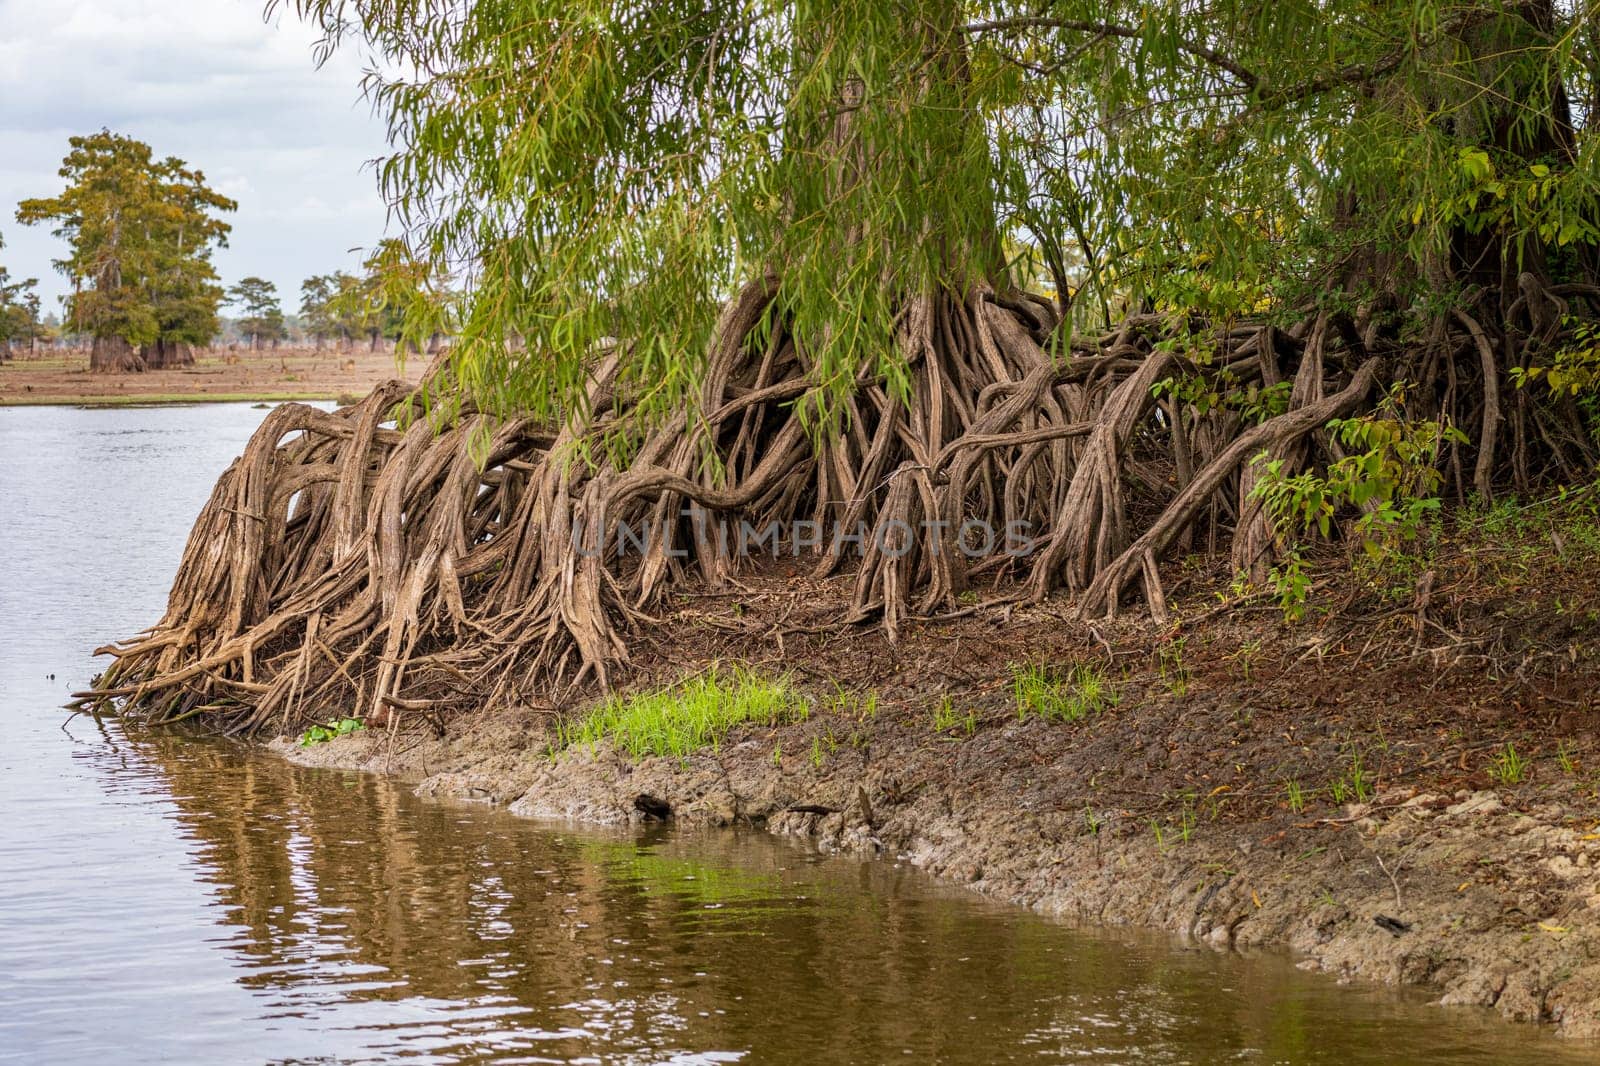 Roots of bald cypress trees rise out of water in Atchafalaya basin by steheap